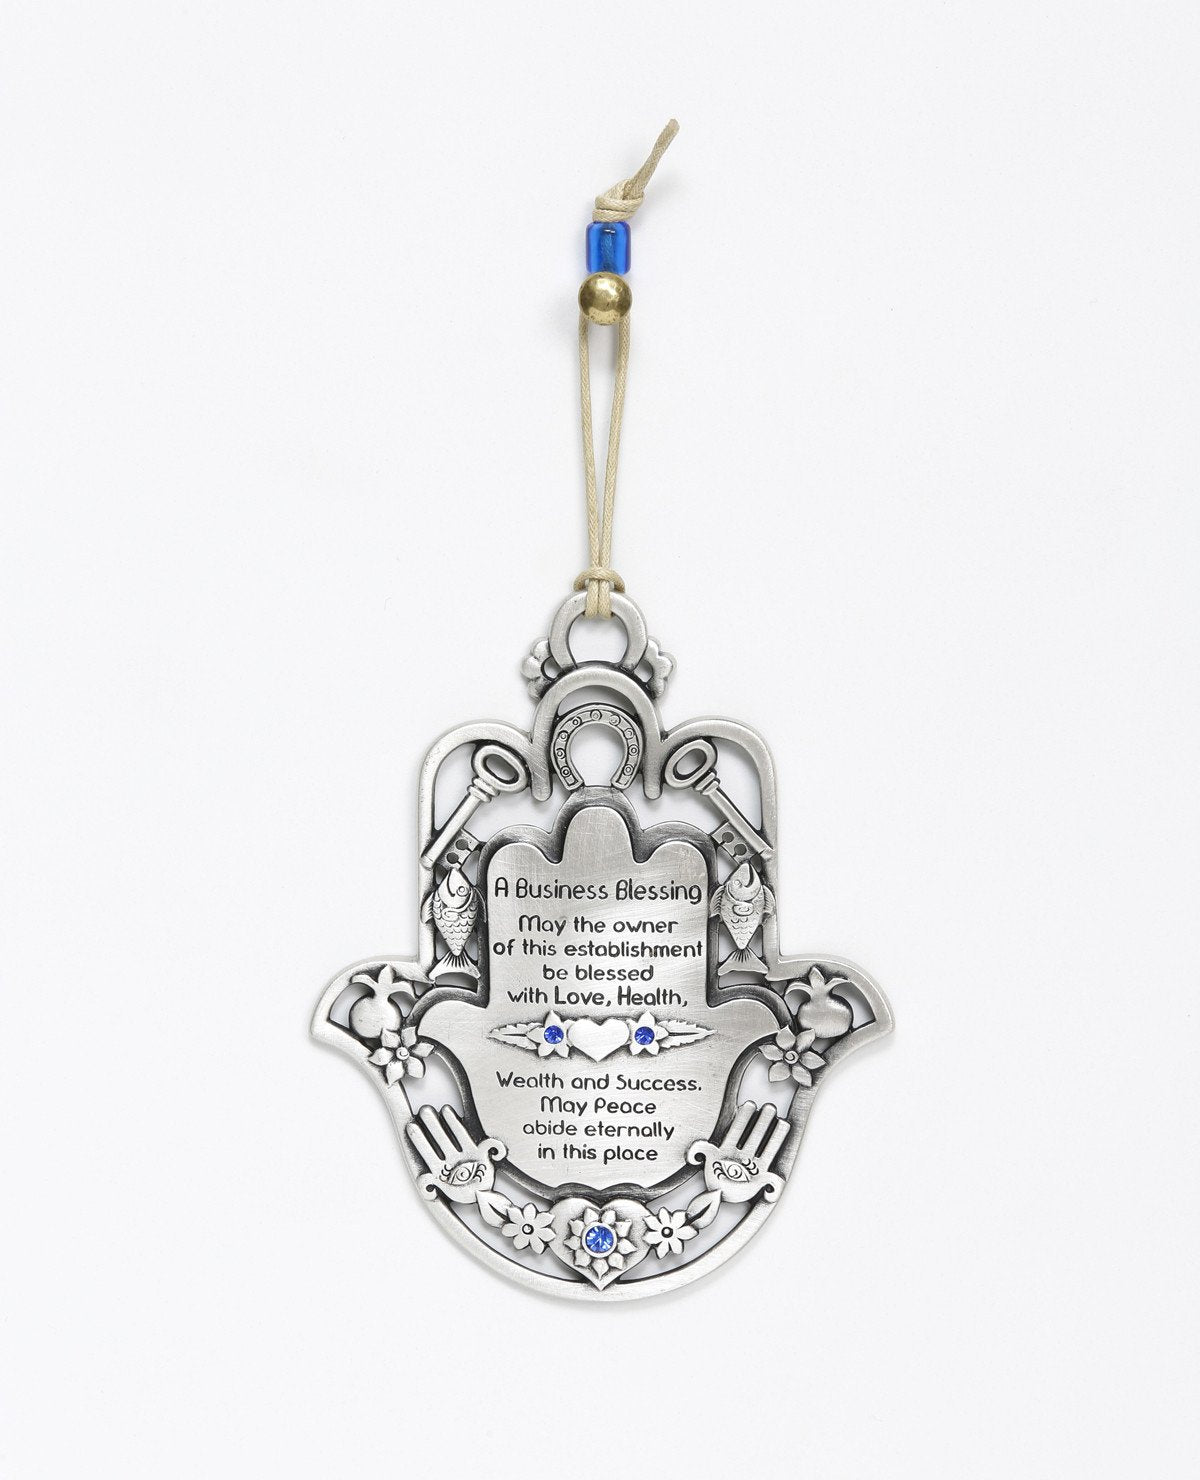 An impressive and richly designed Business Blessing Hamsa for hanging, coated in sterling silver and embedded with blue Swarovski crystals. The Hamsa comes as a frame and is decorated with motifs of luck, abundance and a blessing for the business with a plate at the center featuring blessings of wealth and livelihood. At the bottom of the plate is an engraved eye embedded with a blue crystal, to protect against the "evil eye". A wonderful and exciting gift for anyone with a new or existing business. The orn